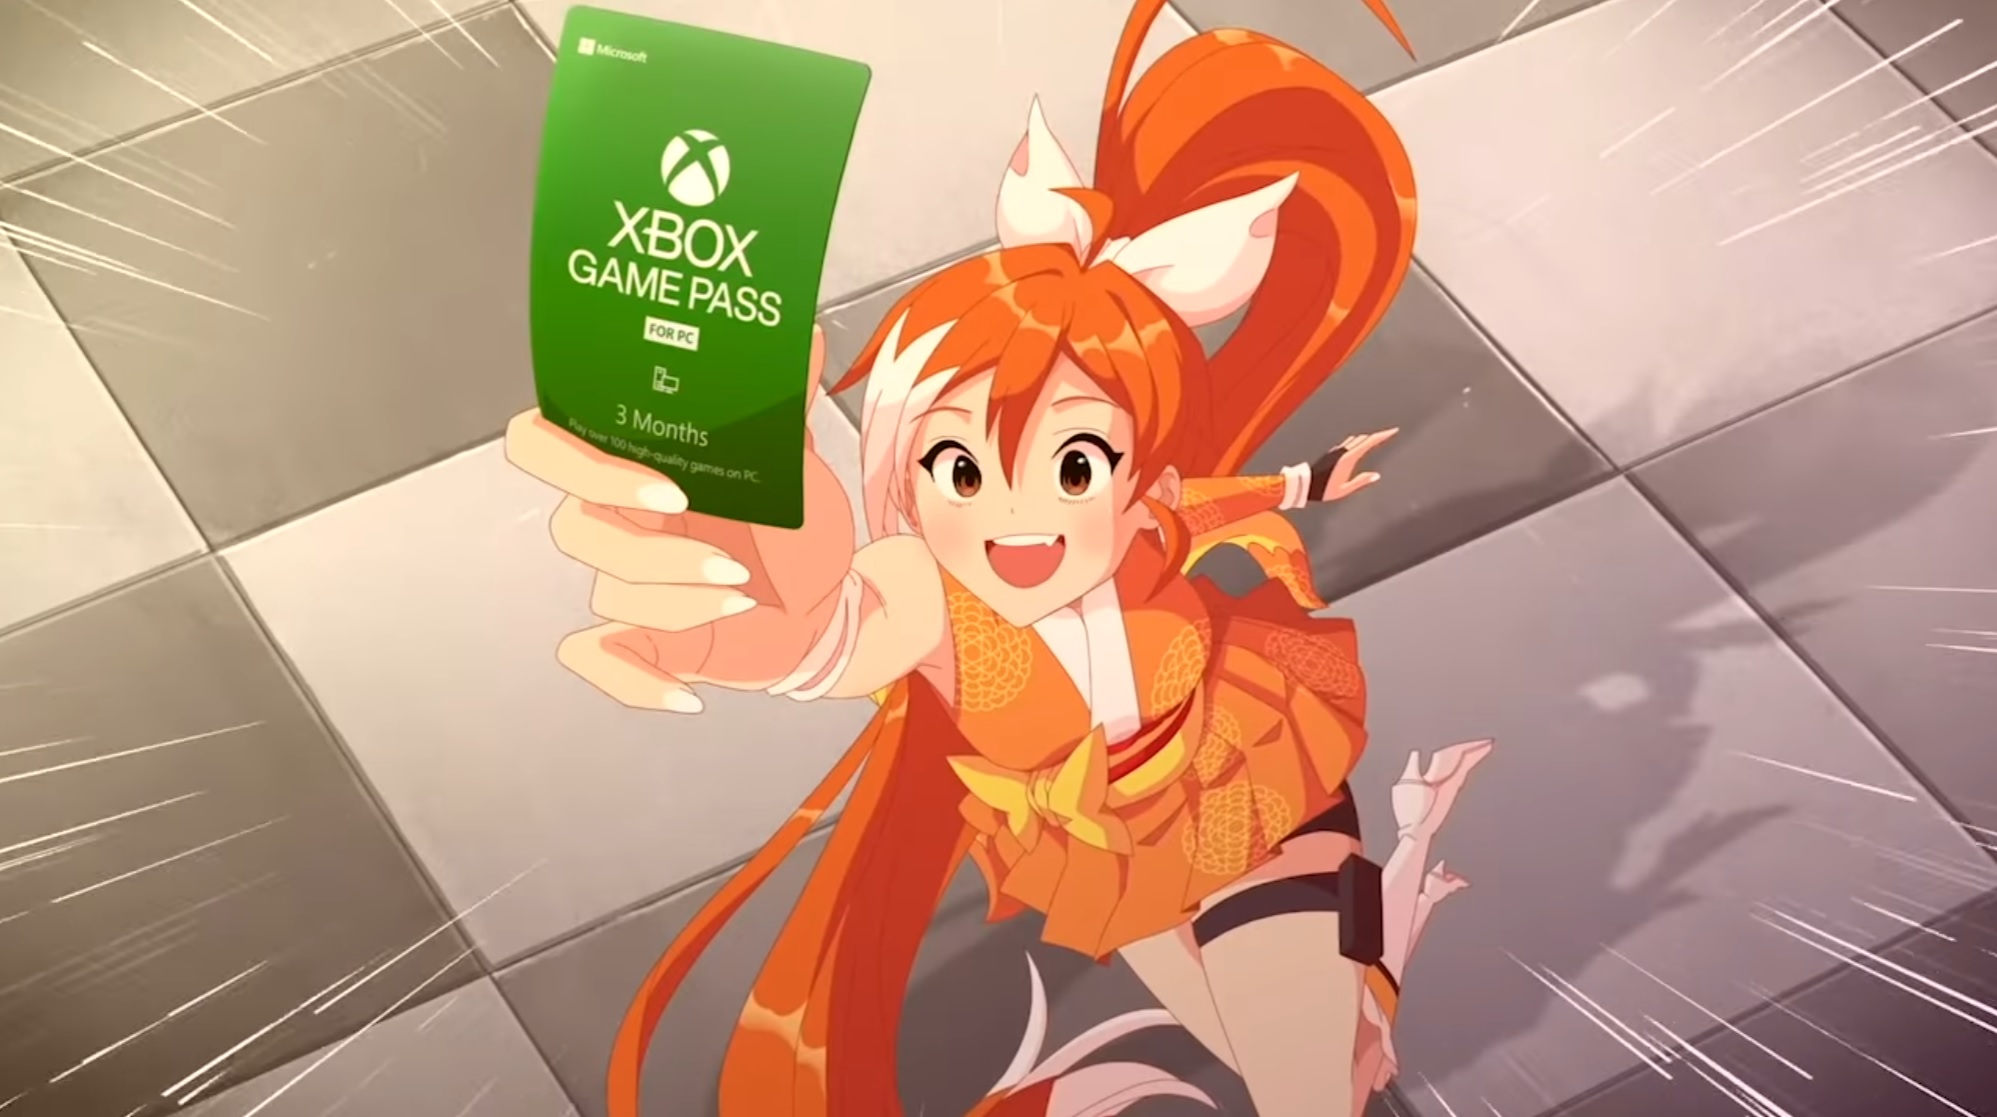 Xbox Games Pass Ultimate now includes a free trial to Crunchyroll